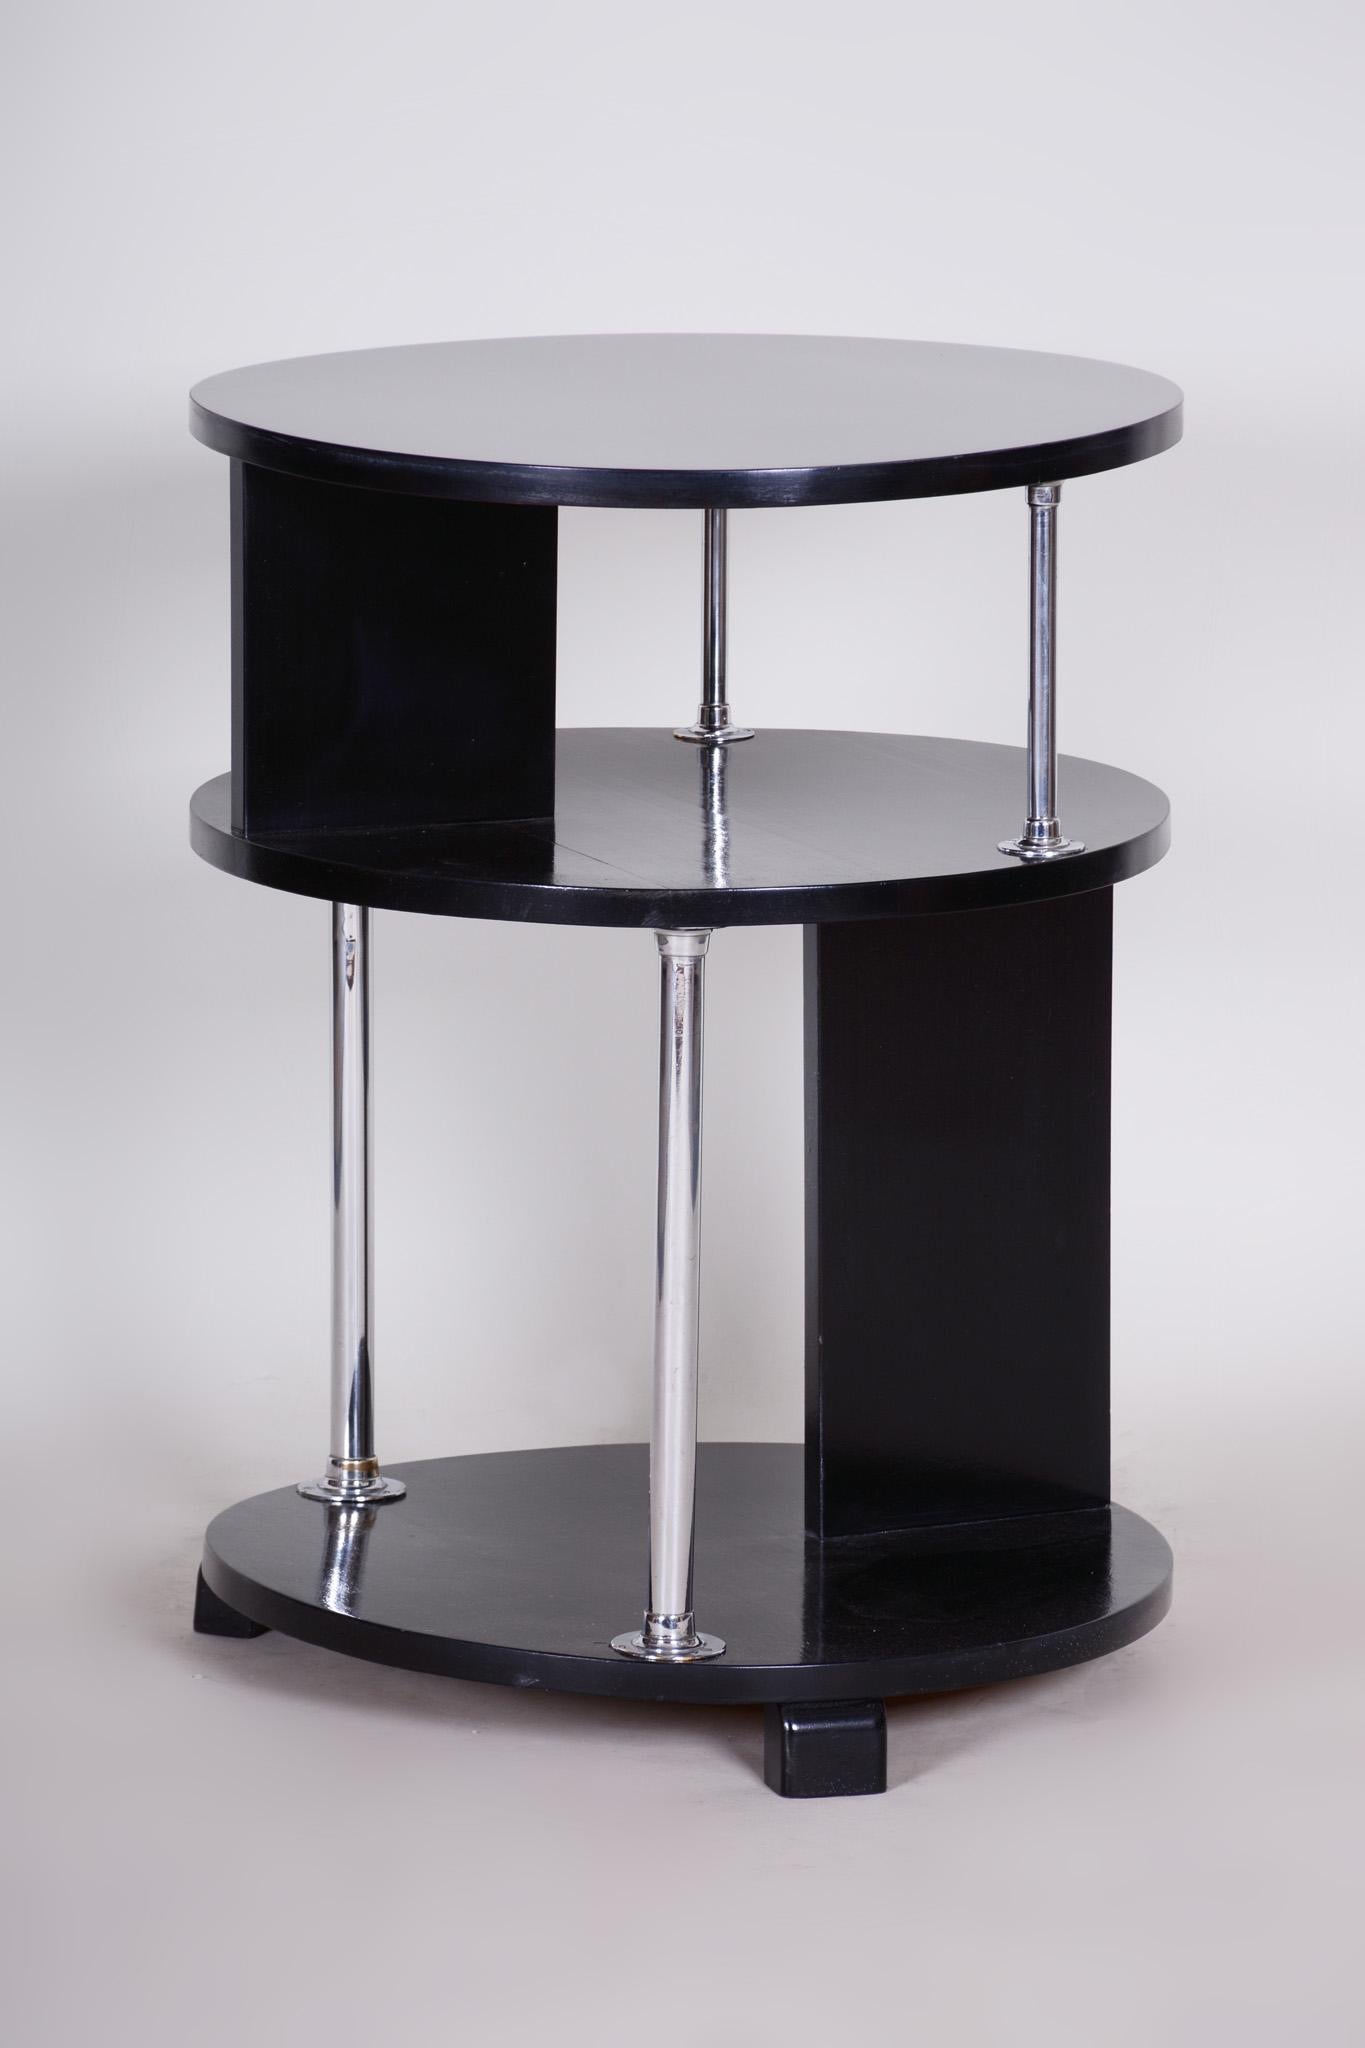 Unusual Small Czech Restored Round Black Beech Chrome Bauhaus Table, 1930s For Sale 5